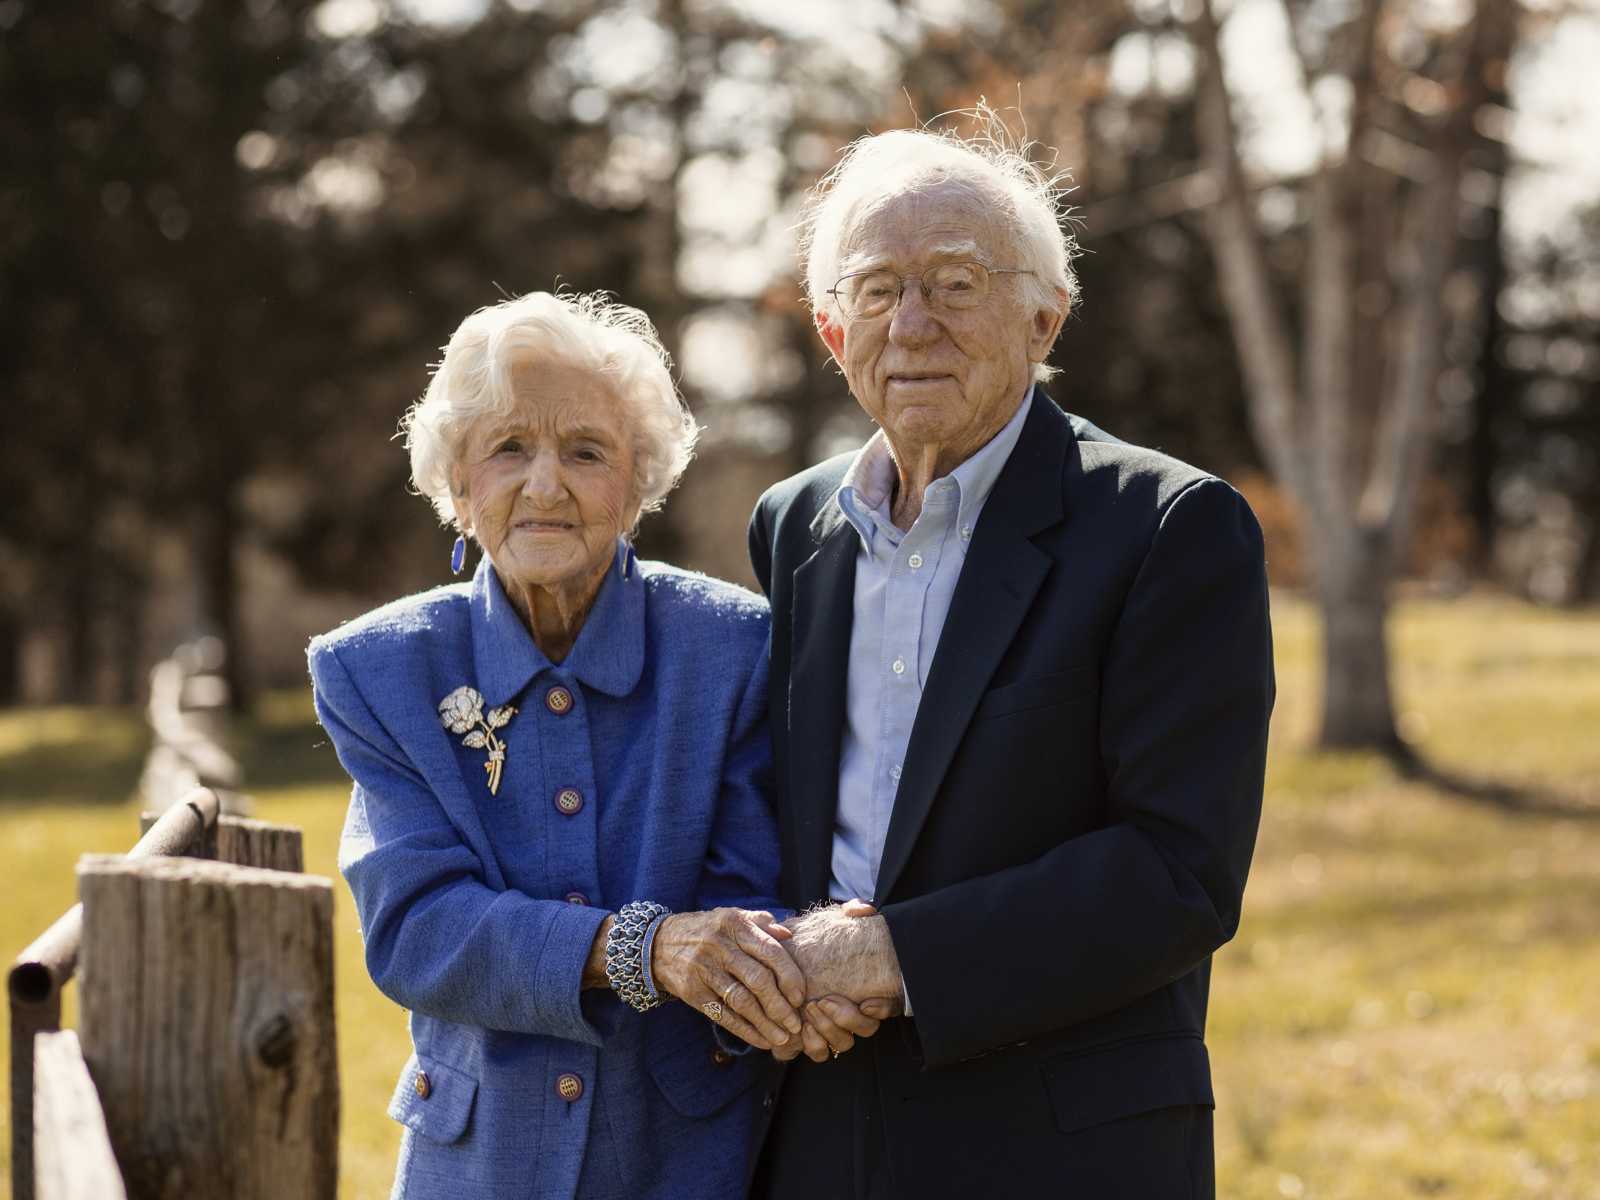 92 year old woman holds husbands hands as they smile in their yard next to wooden fence